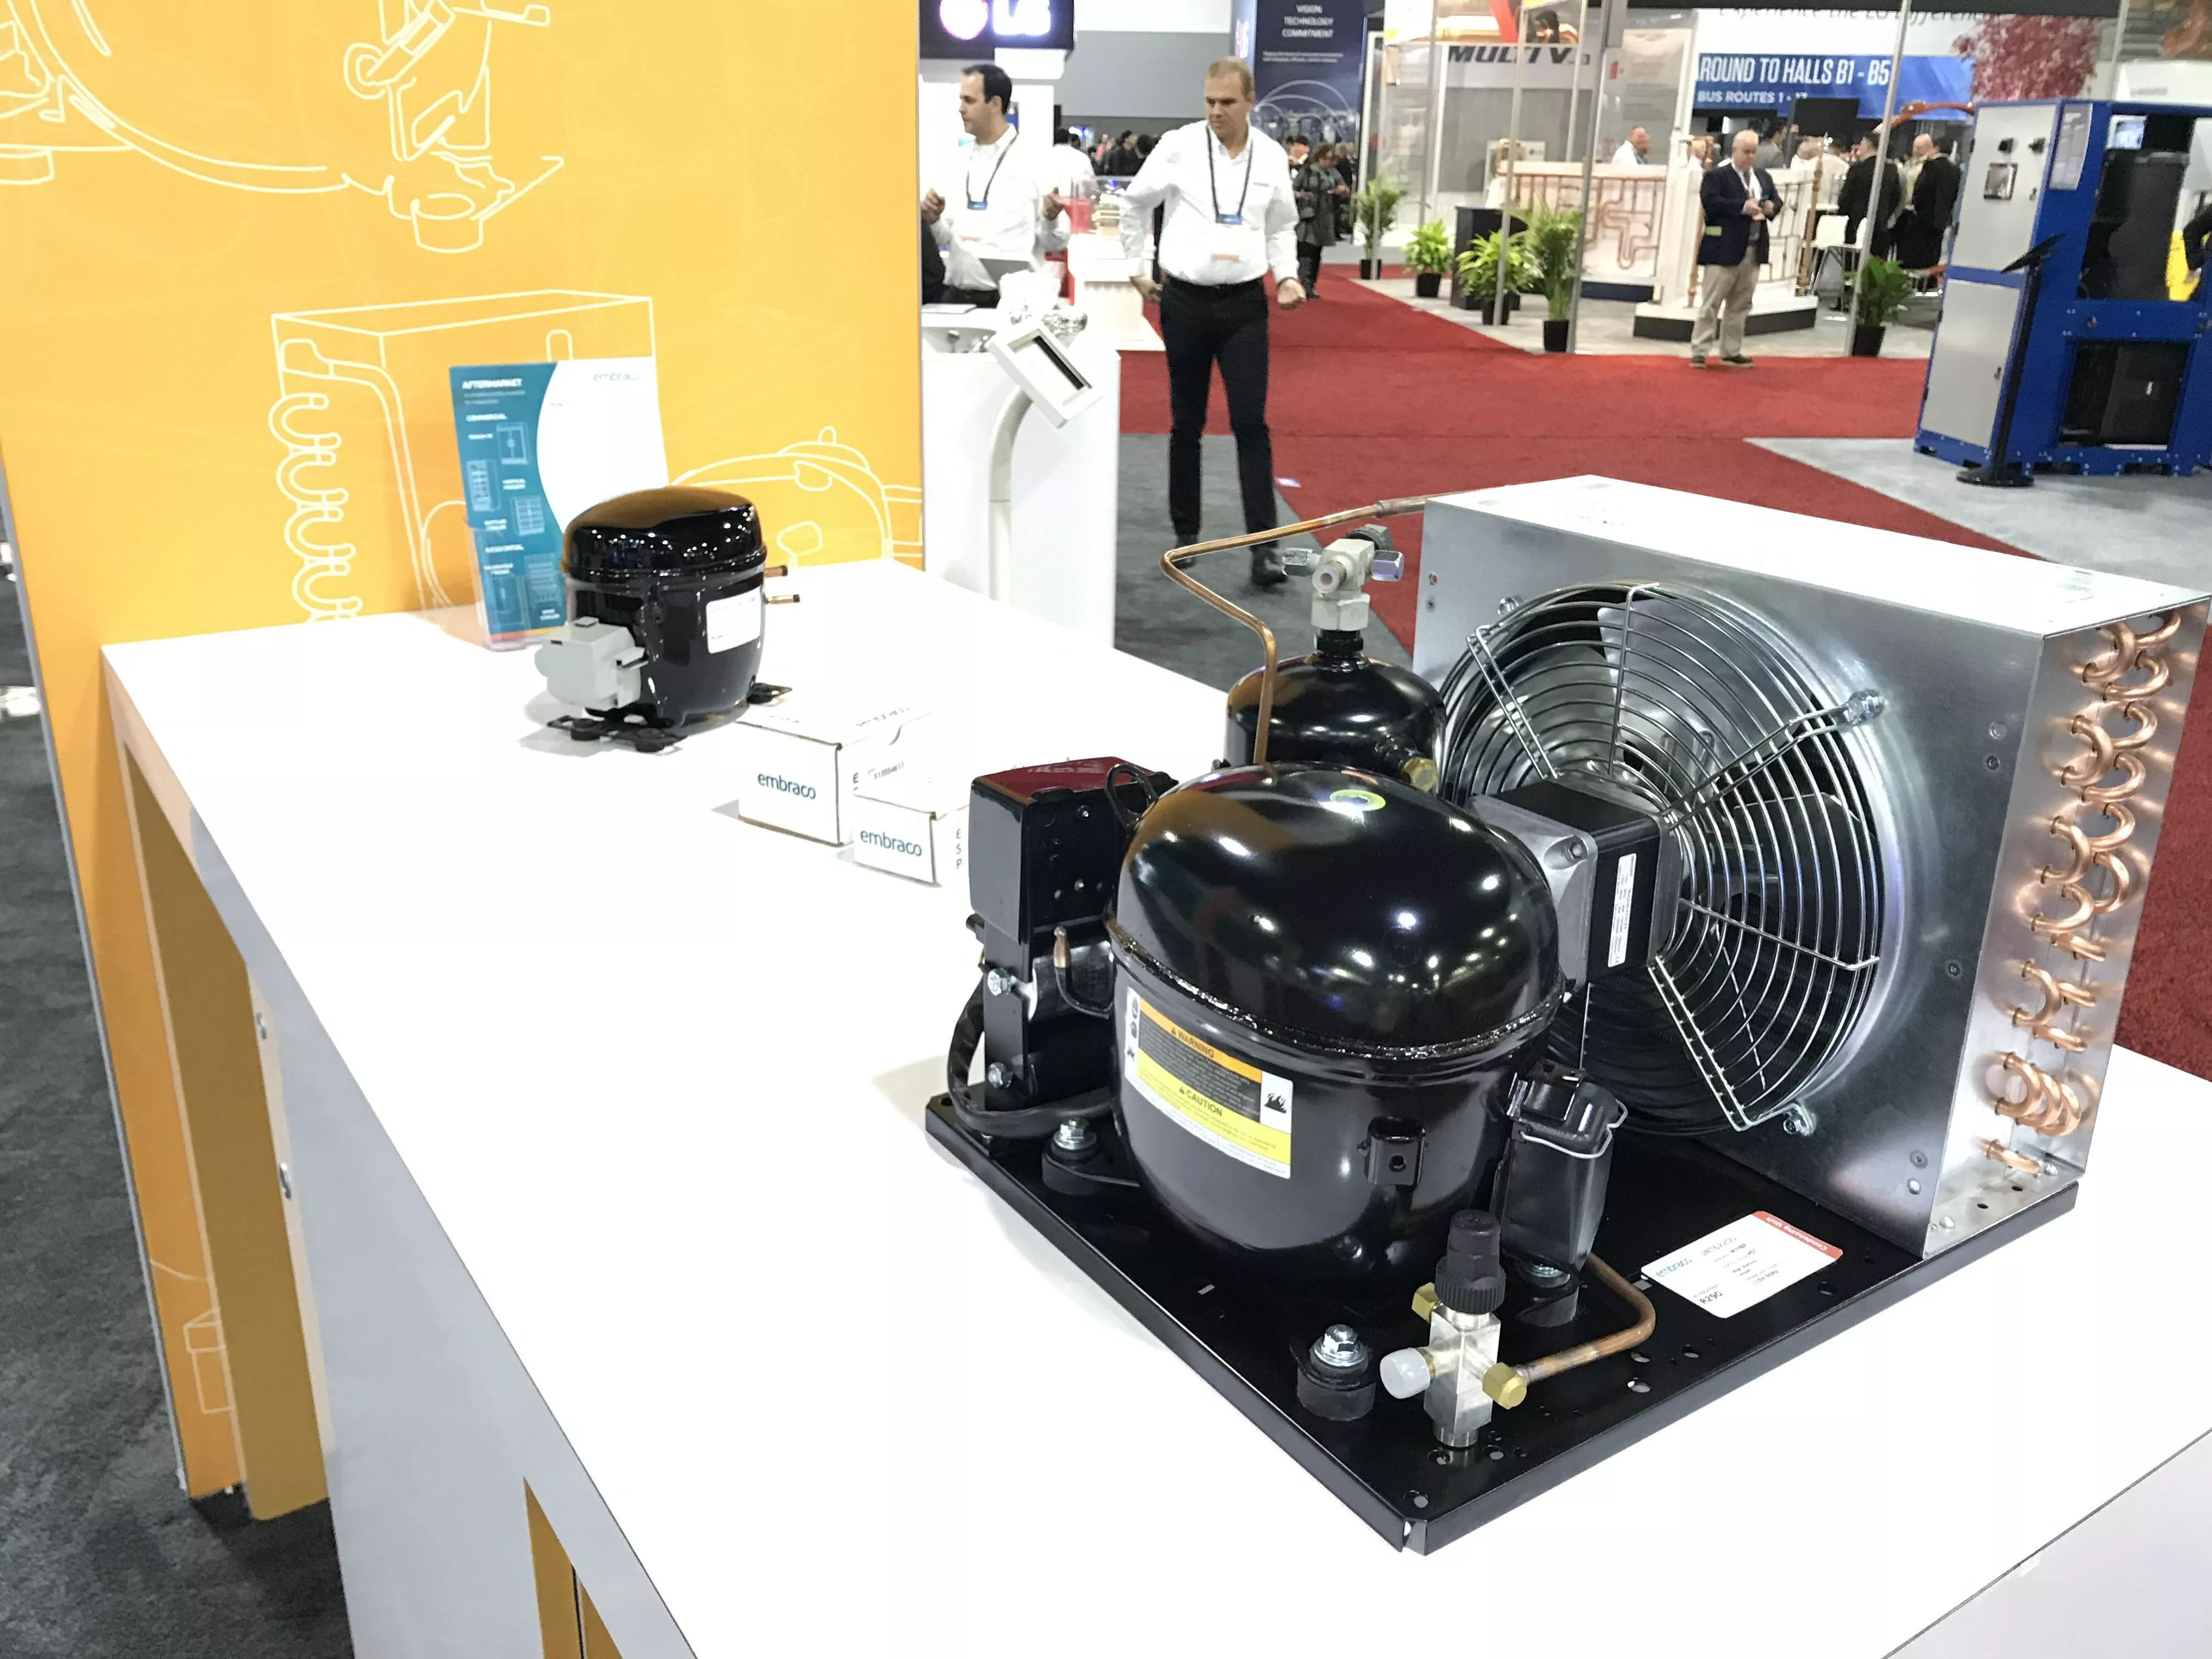 2019 AHR Expo Showcases Excitement for HVACR, Global Market Expansion